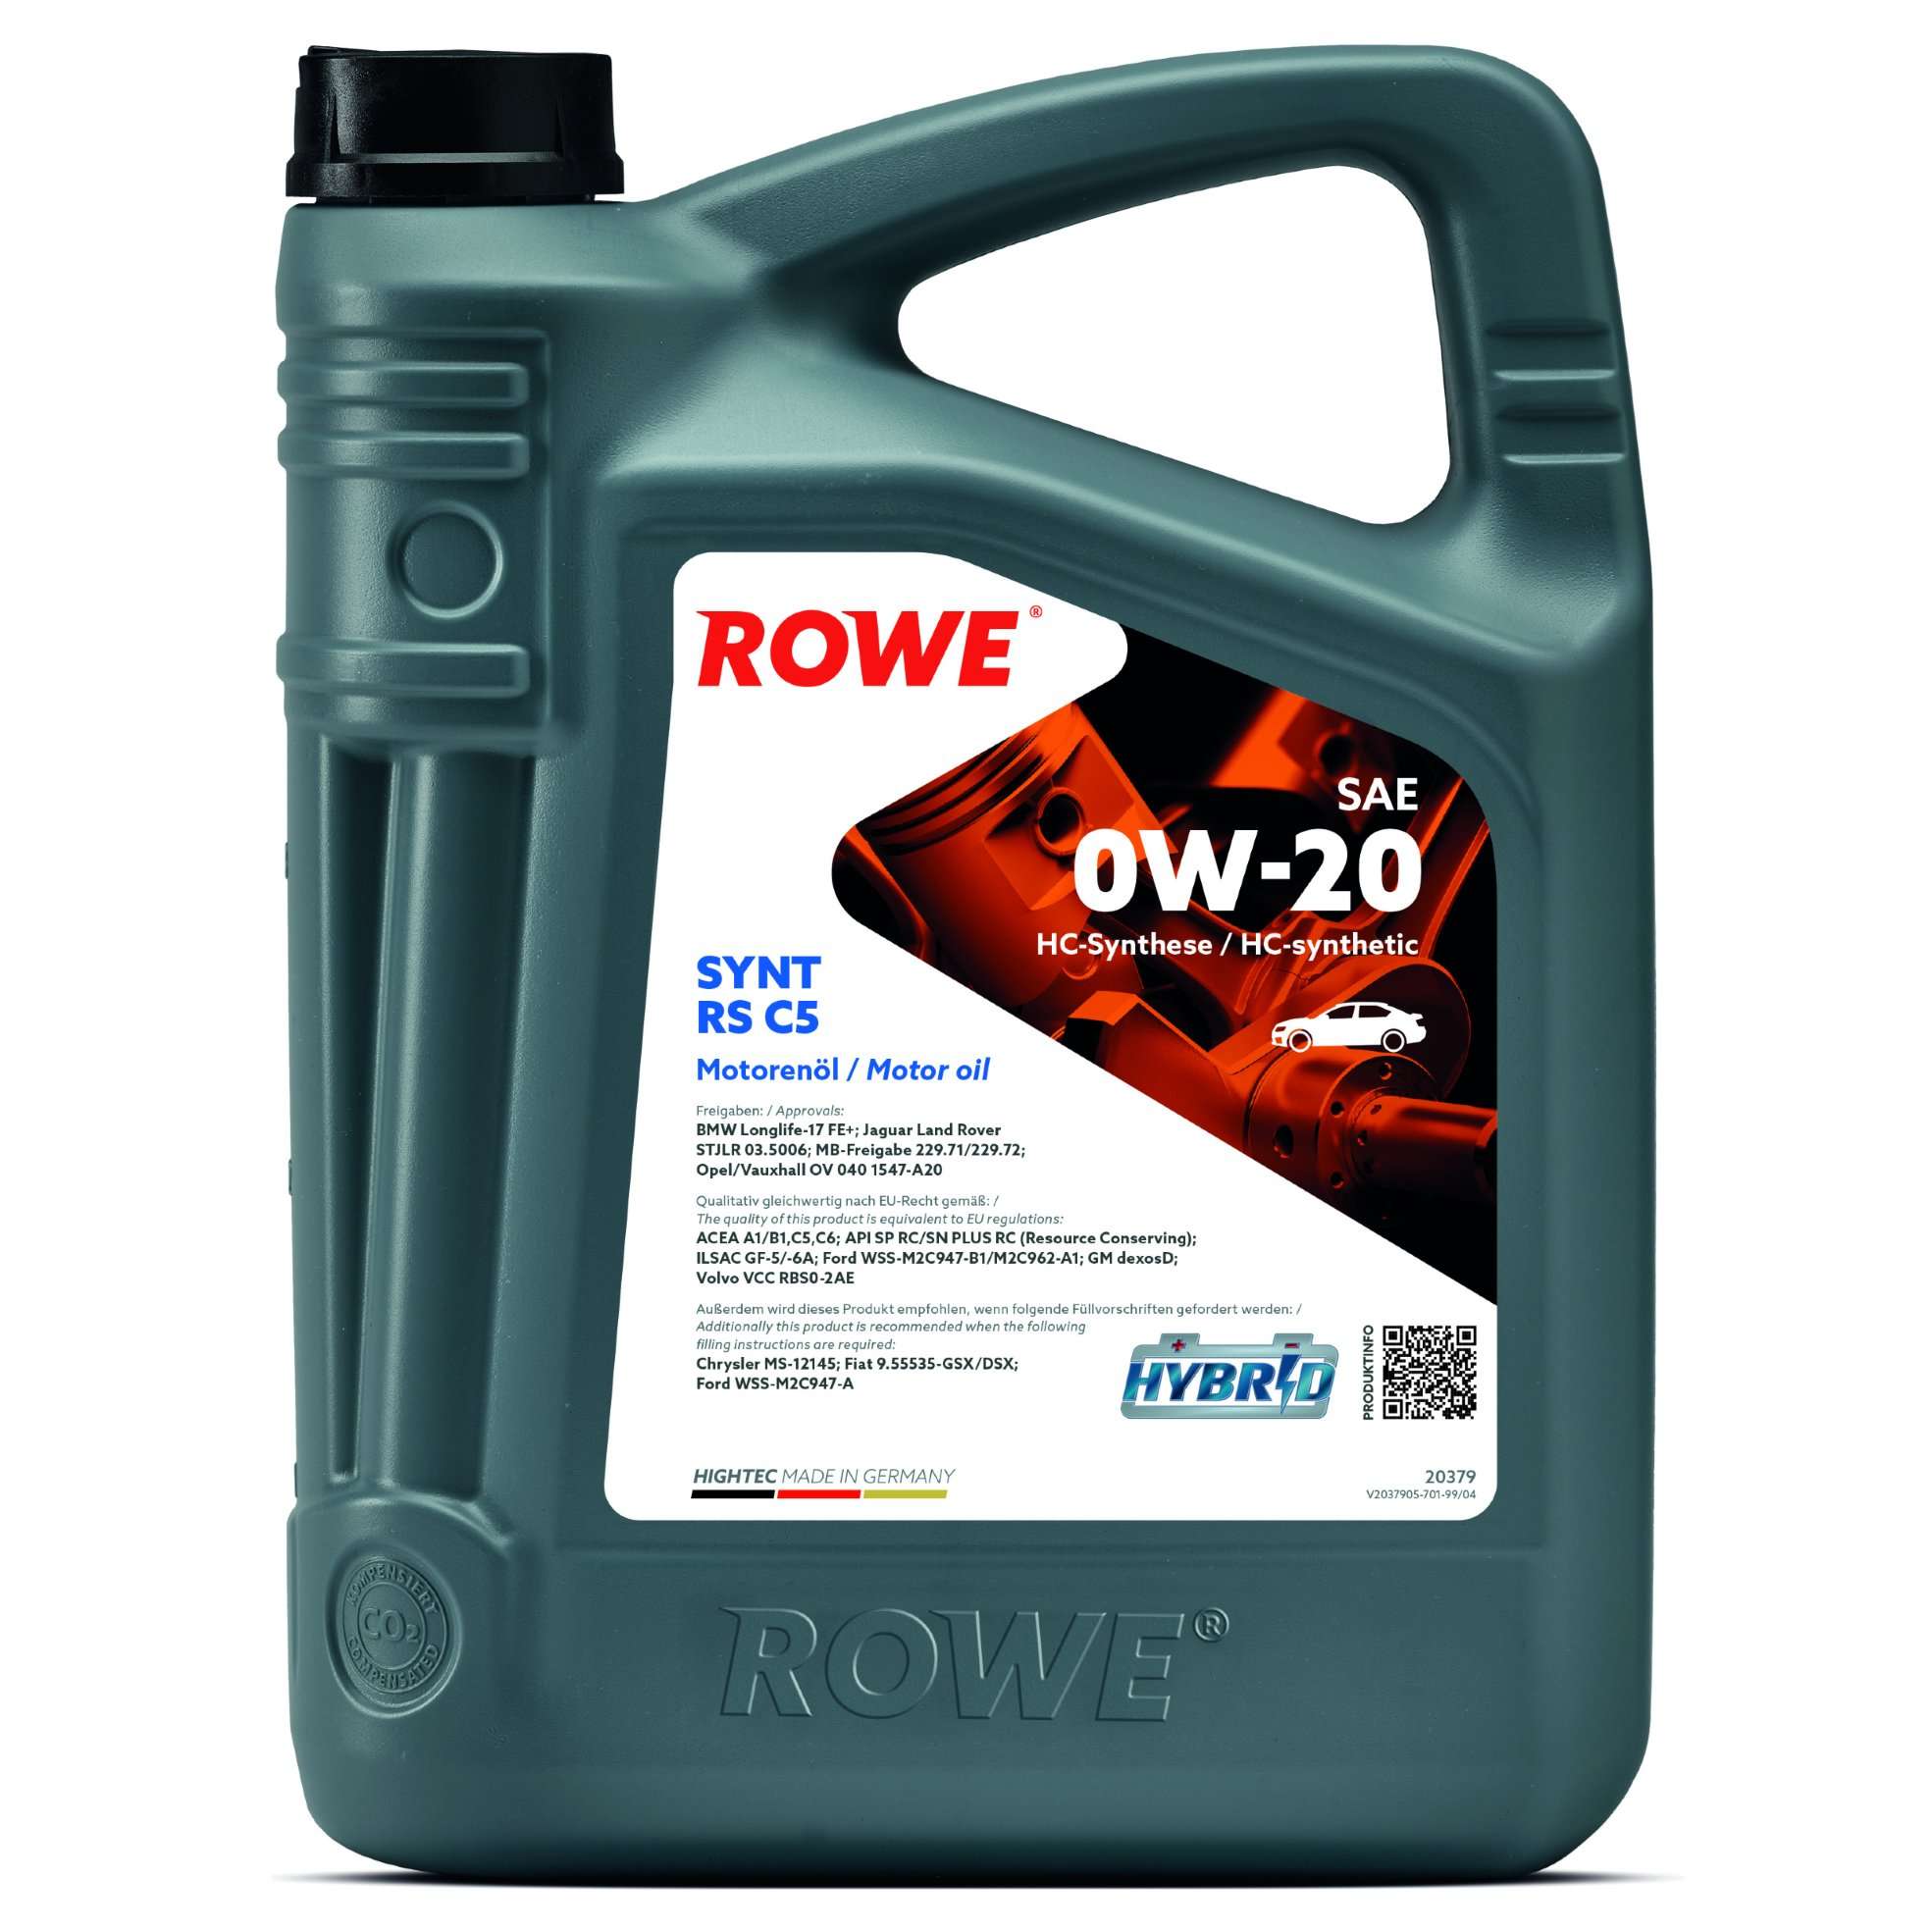 Моторное масло ROWE Synt RS C5 0W-20 4 л, 20379-0040-99